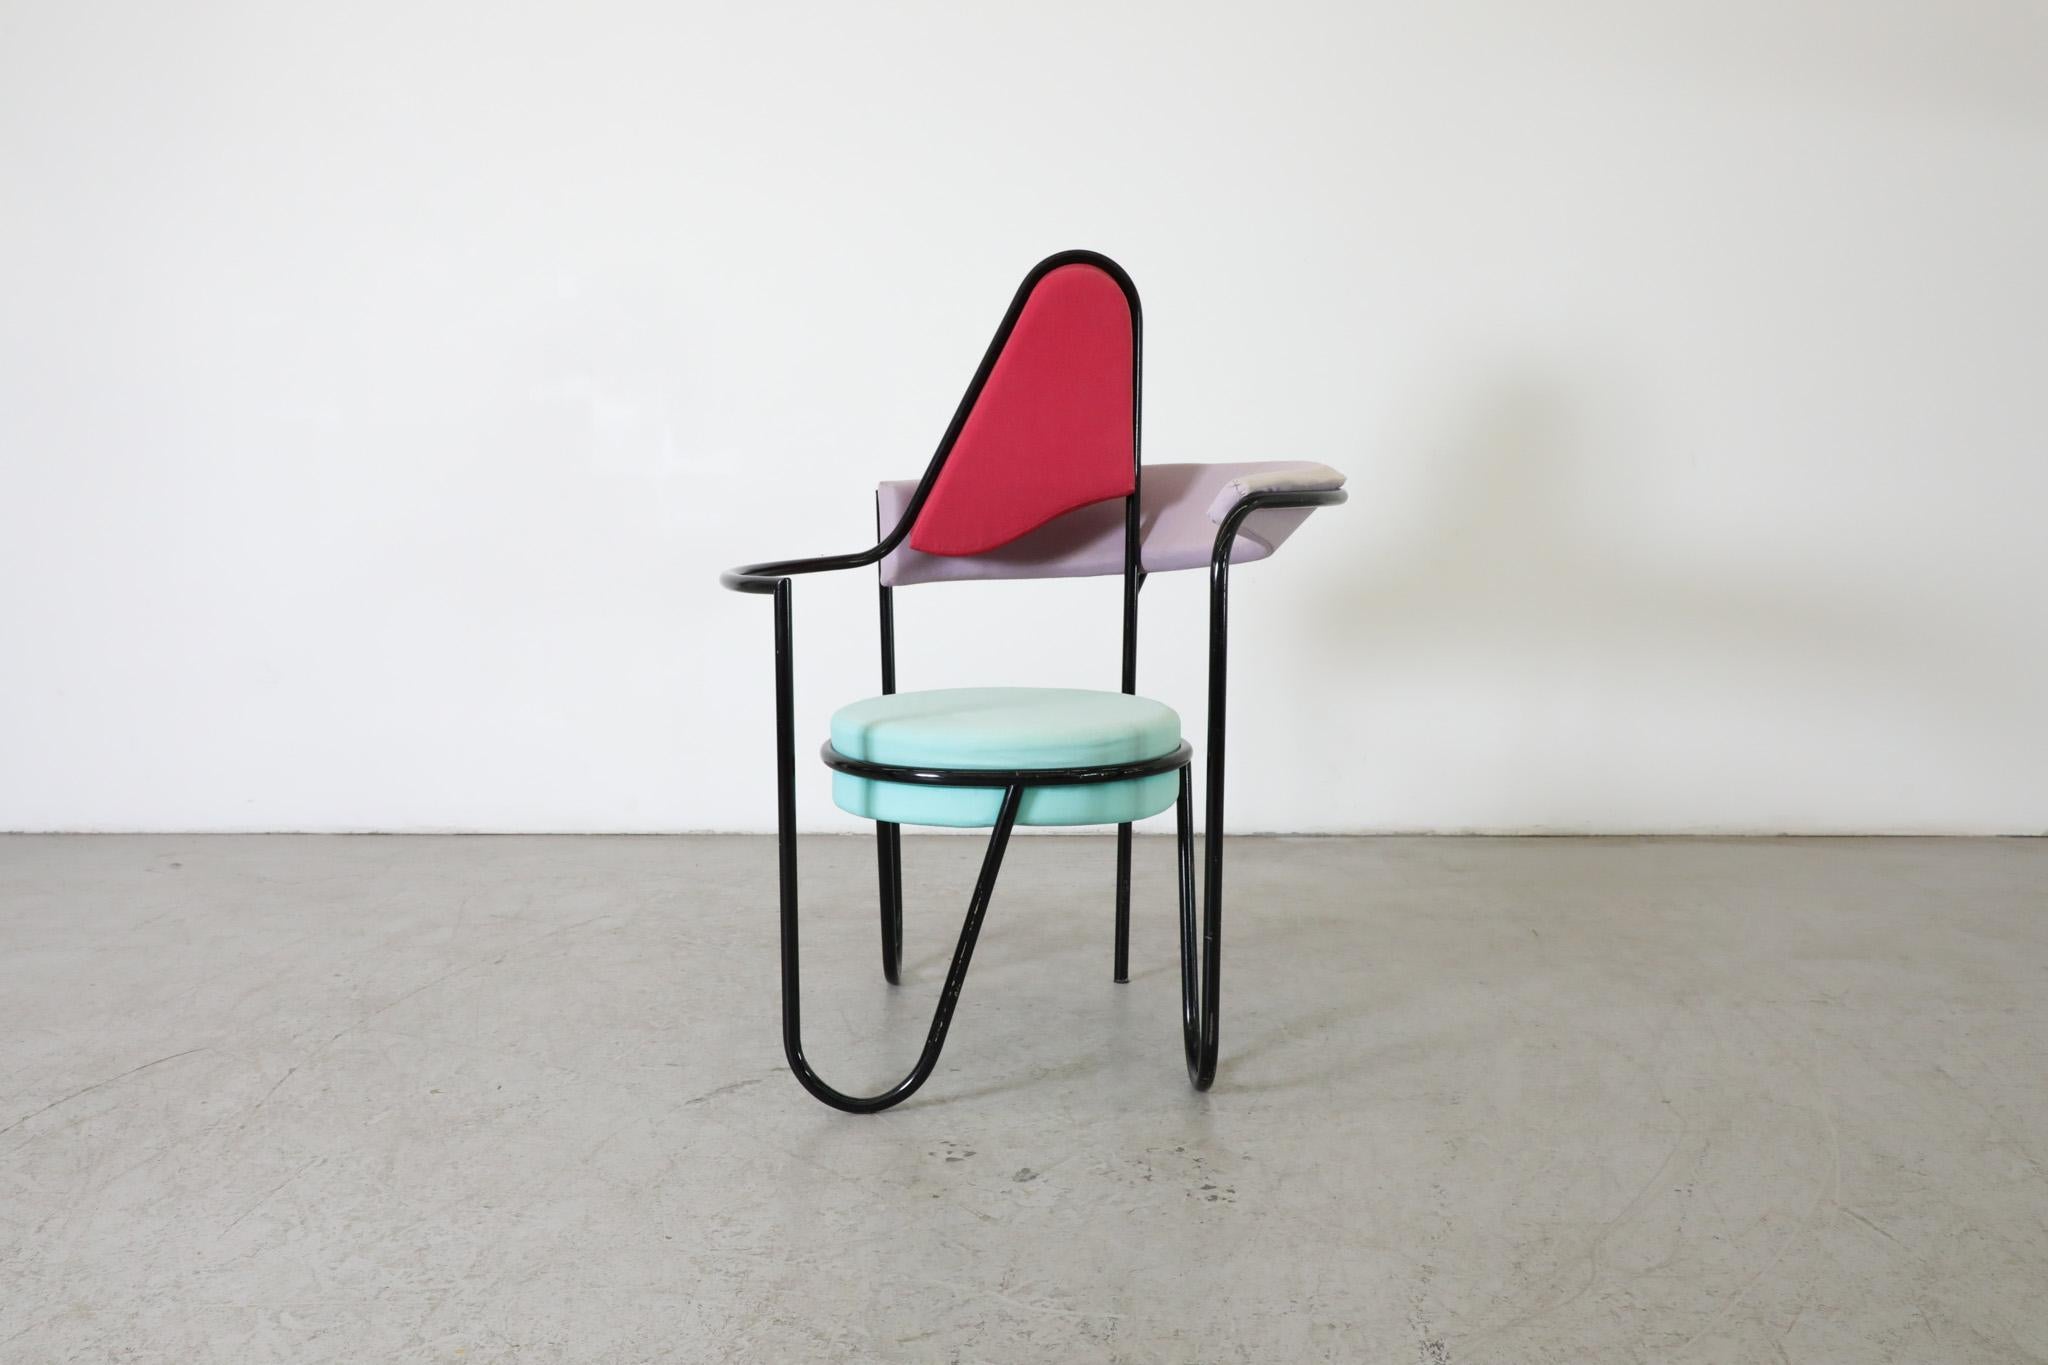 This Dutch, 1980's “Memphis” style chair is comprised of vividly colored geometric forms and and grounding, black frame and strikes a playful balance in its colors and shapes. Memphis Design is sometimes referred to as the result of a wild night